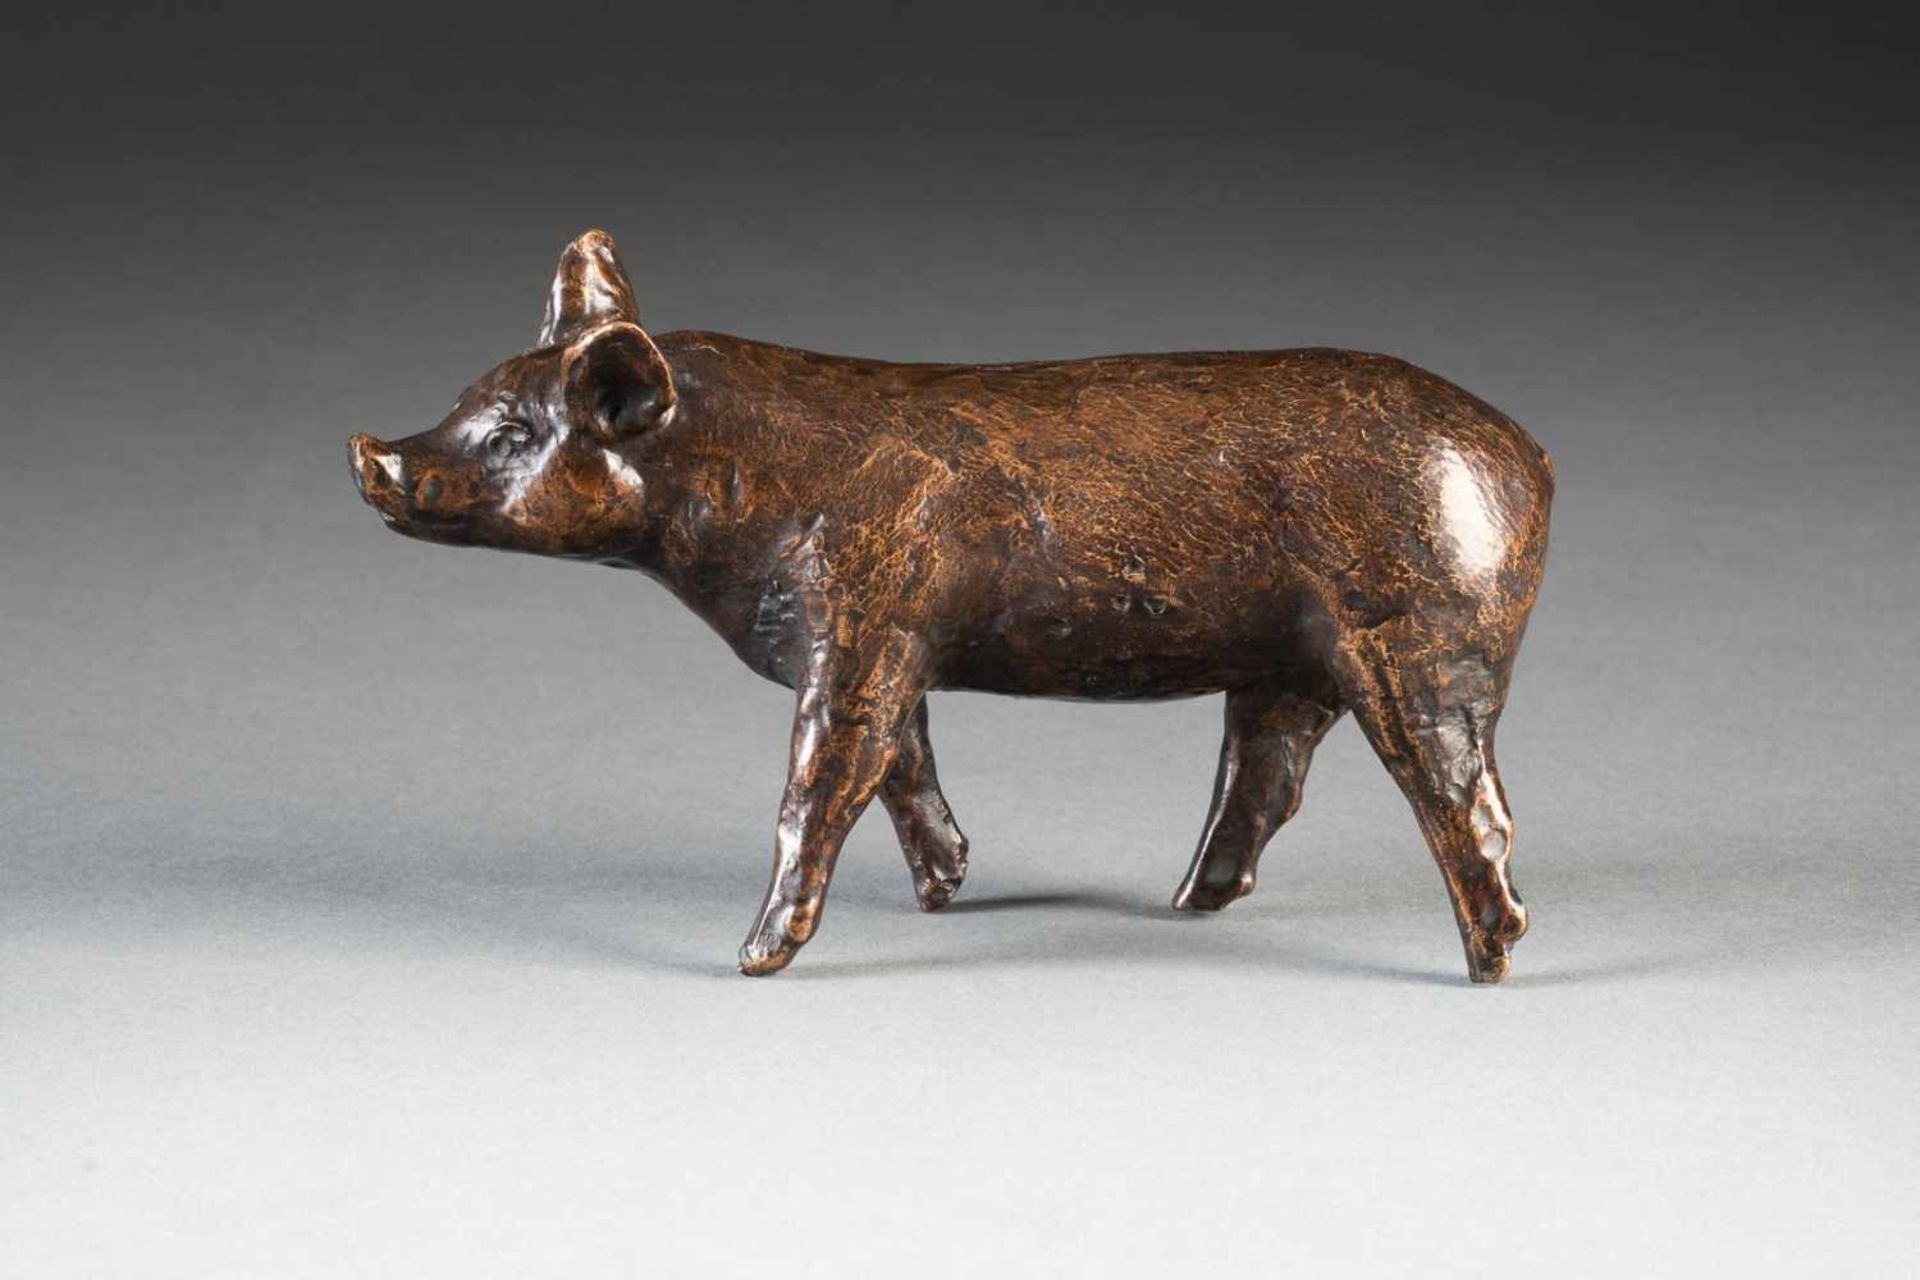 KURT ARENTZ1934 Cologne - 2014 Munich LUCKY PIG Bronze, brownly patinized. H. 9 cm and L. 15 cm.